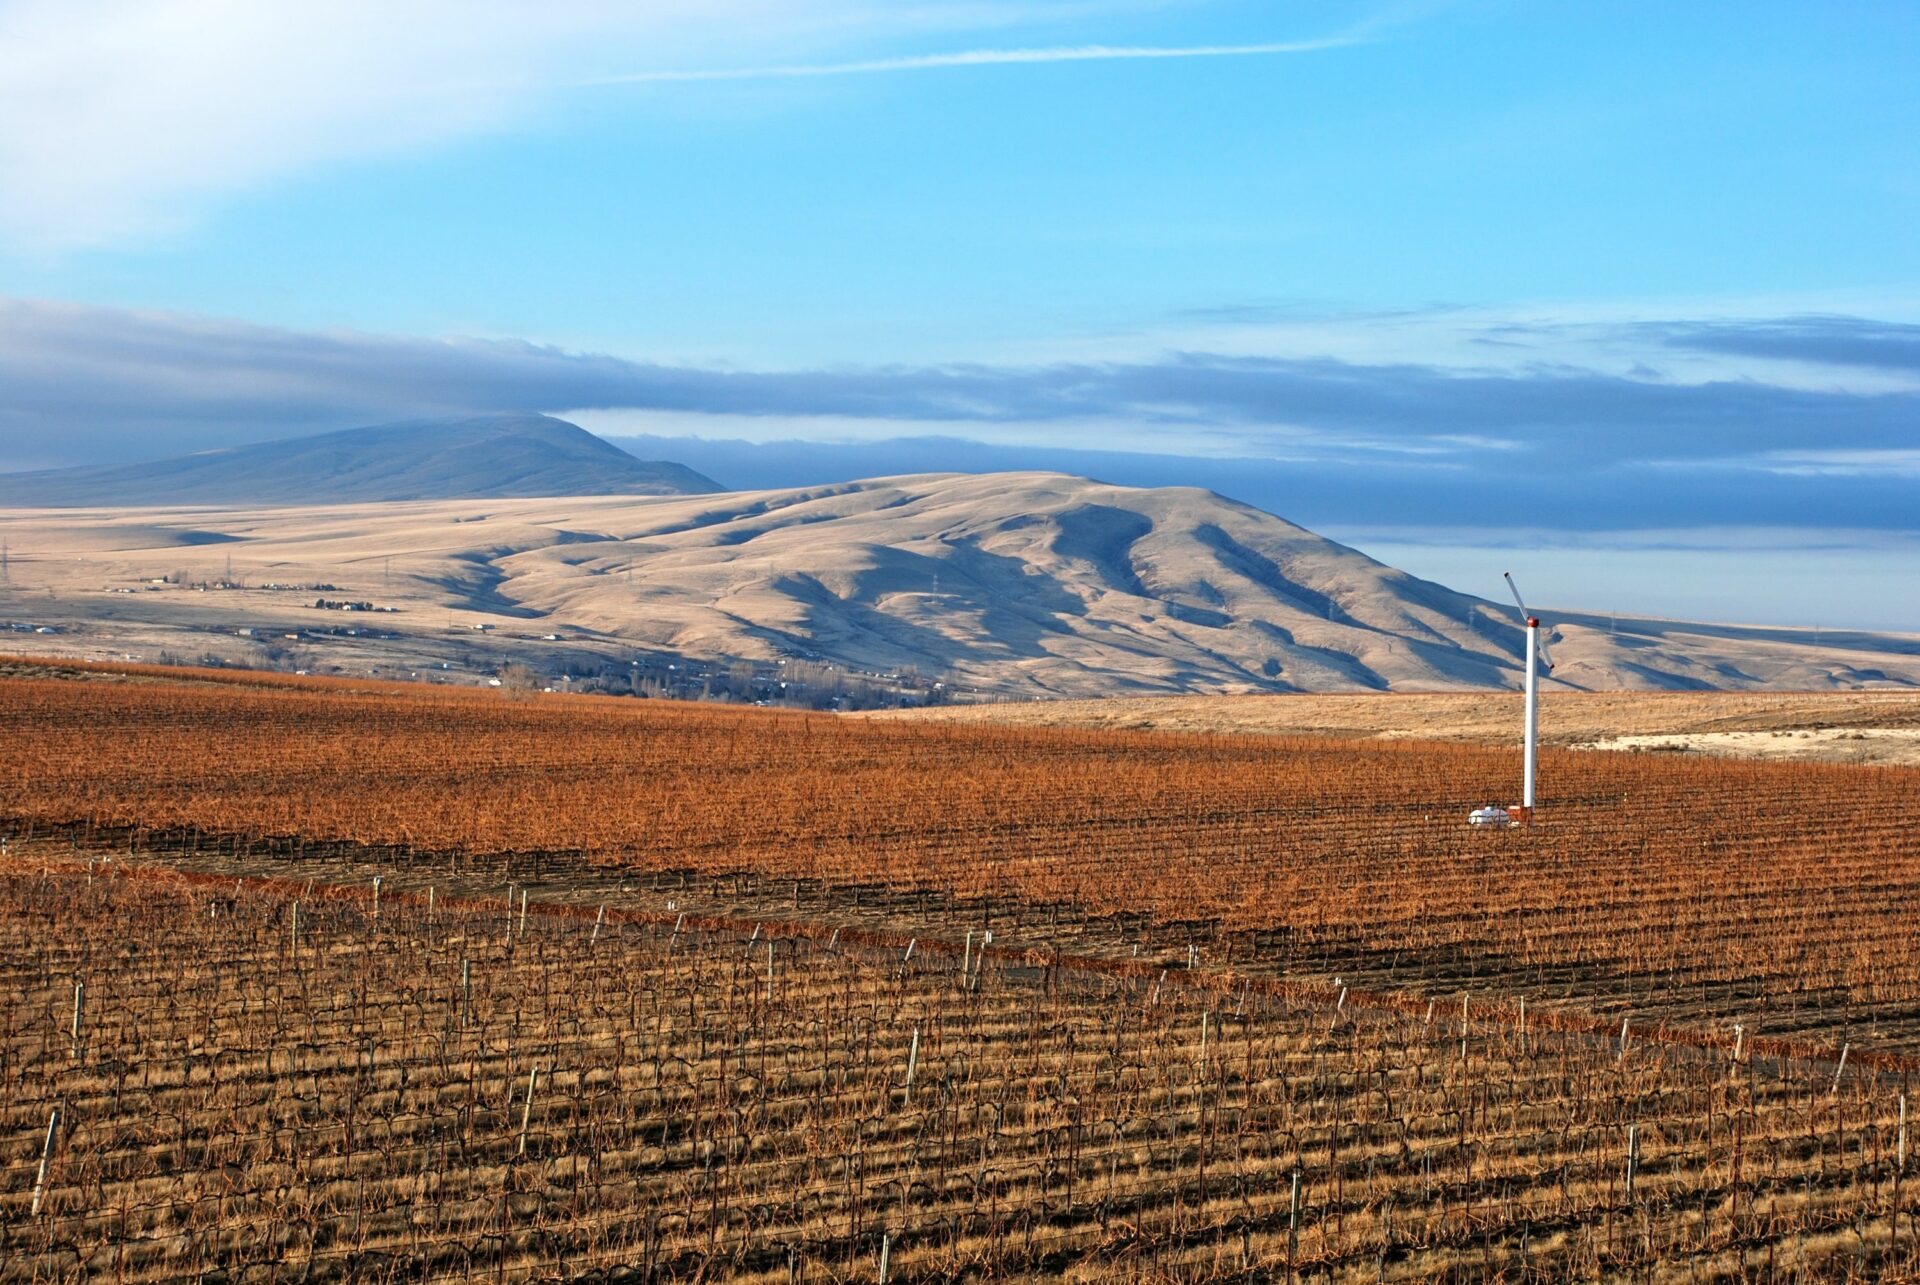 Image of Yakima farmland/landscape with fields and hills in background